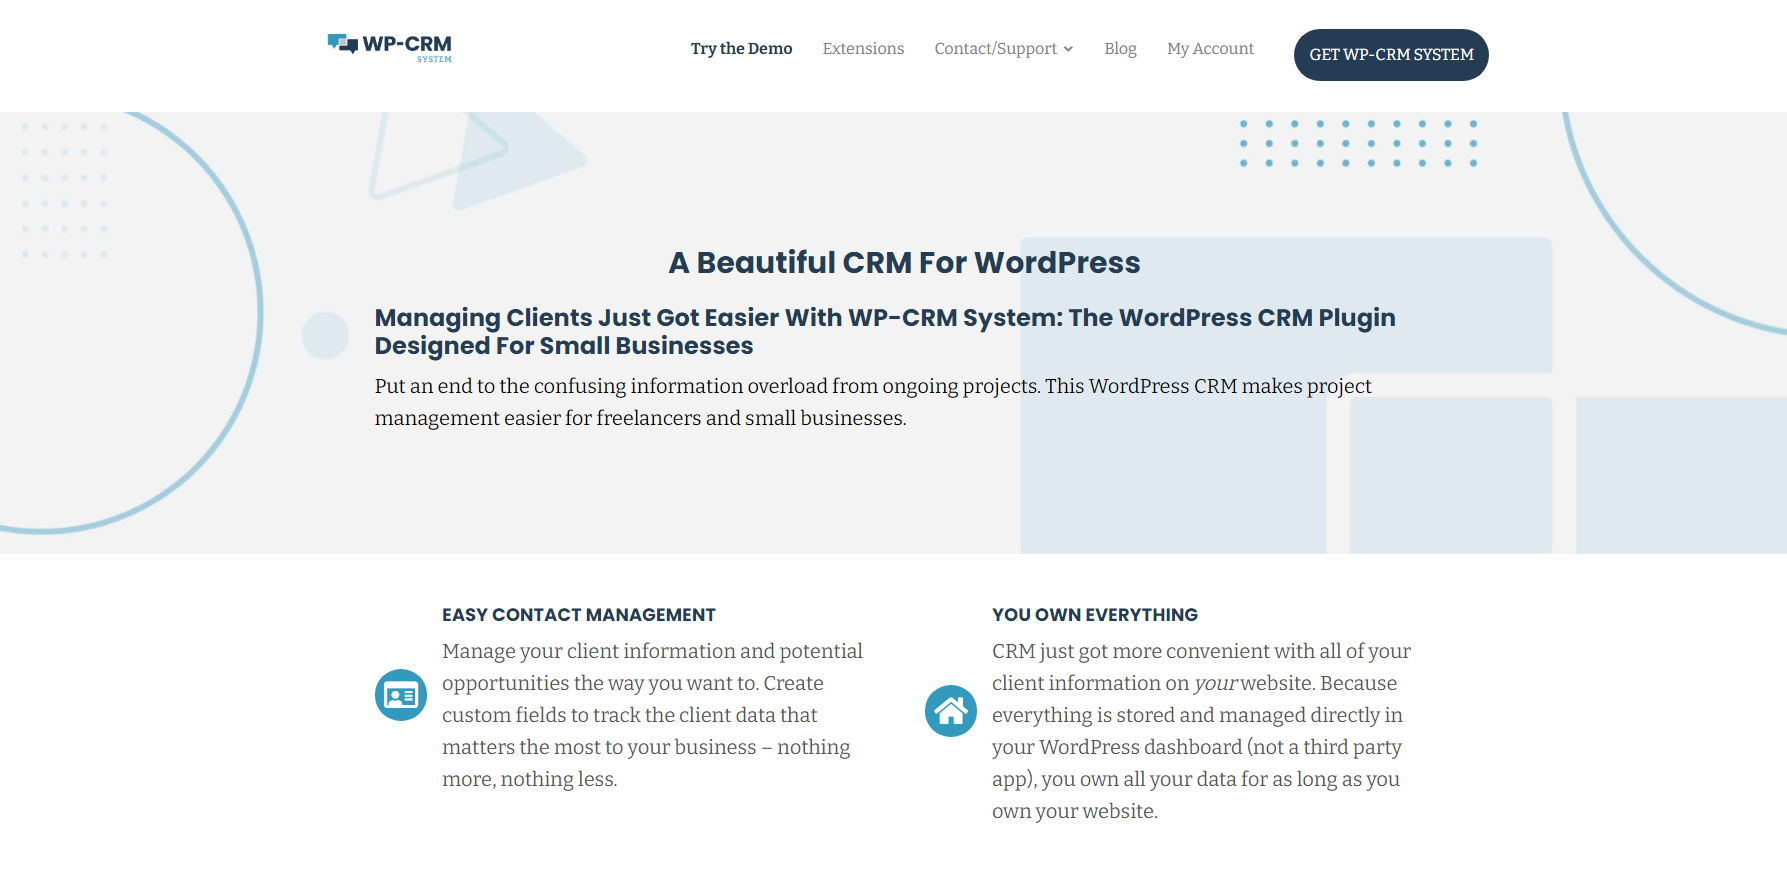 WP-CRM system